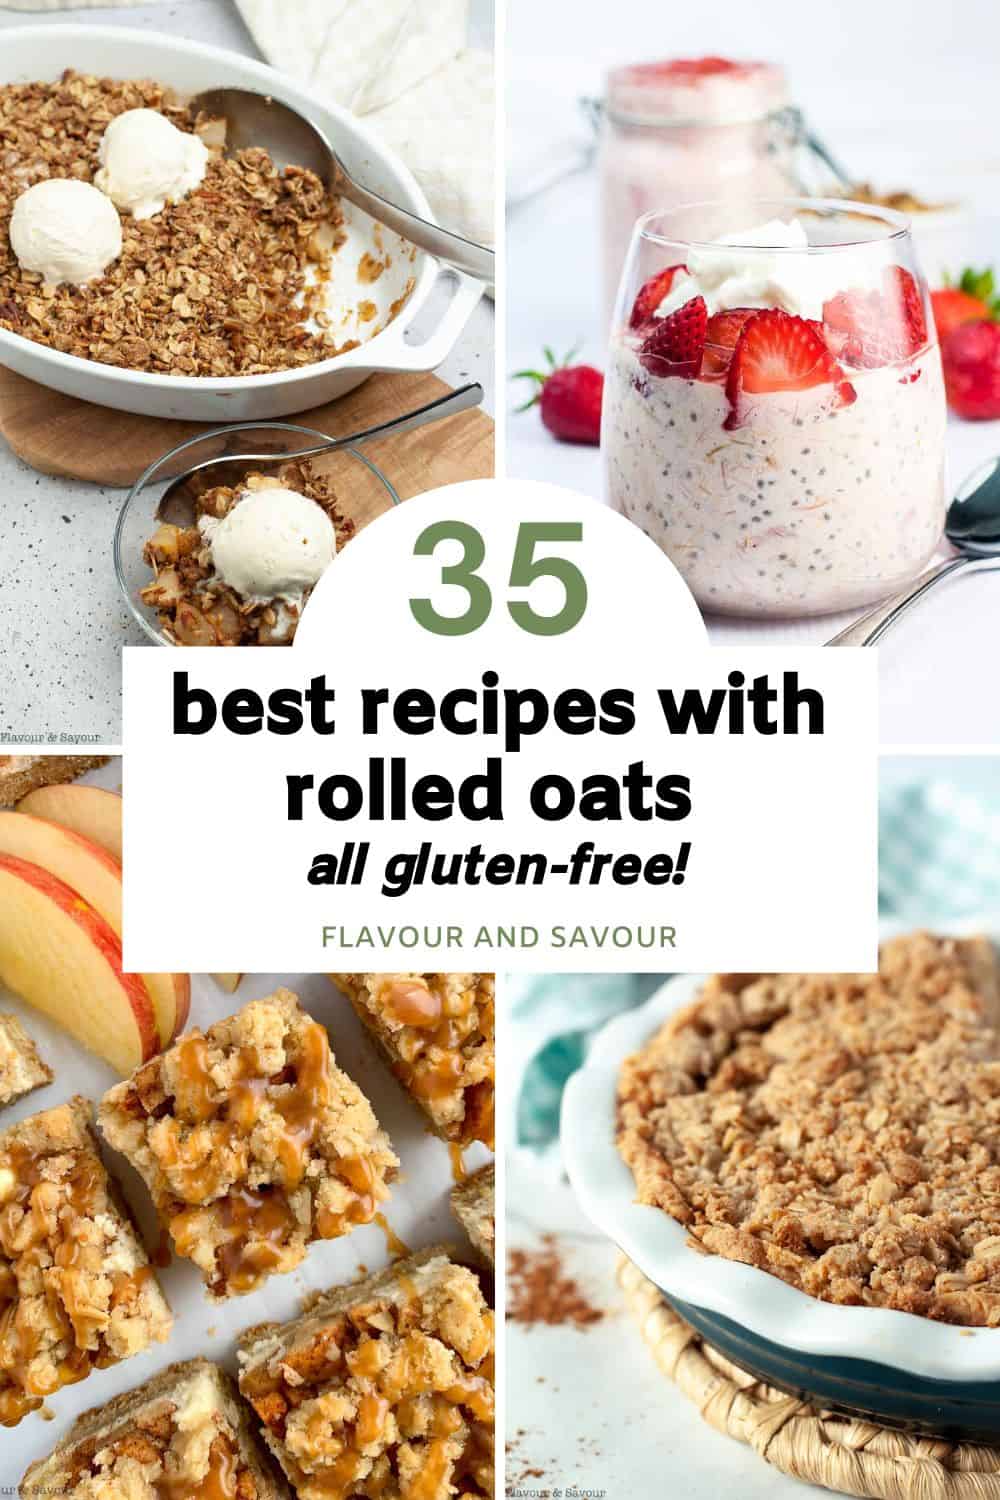 Image with text for 35 best recipes with rolled oats.